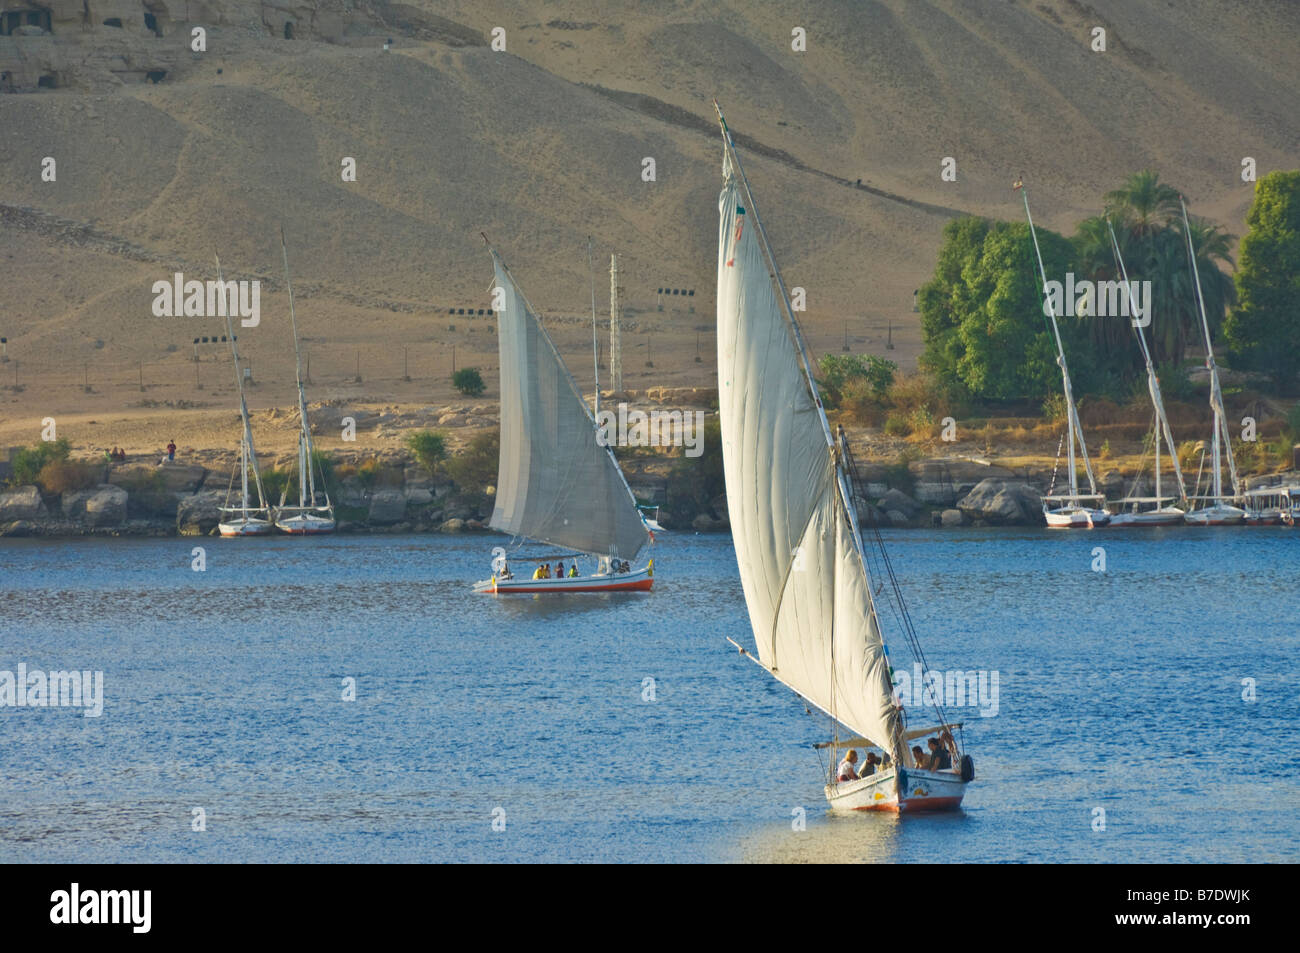 Traditional wooden sailing boats or Feluccas sailing on the river Nile at Aswan Egypt Middle East Stock Photo